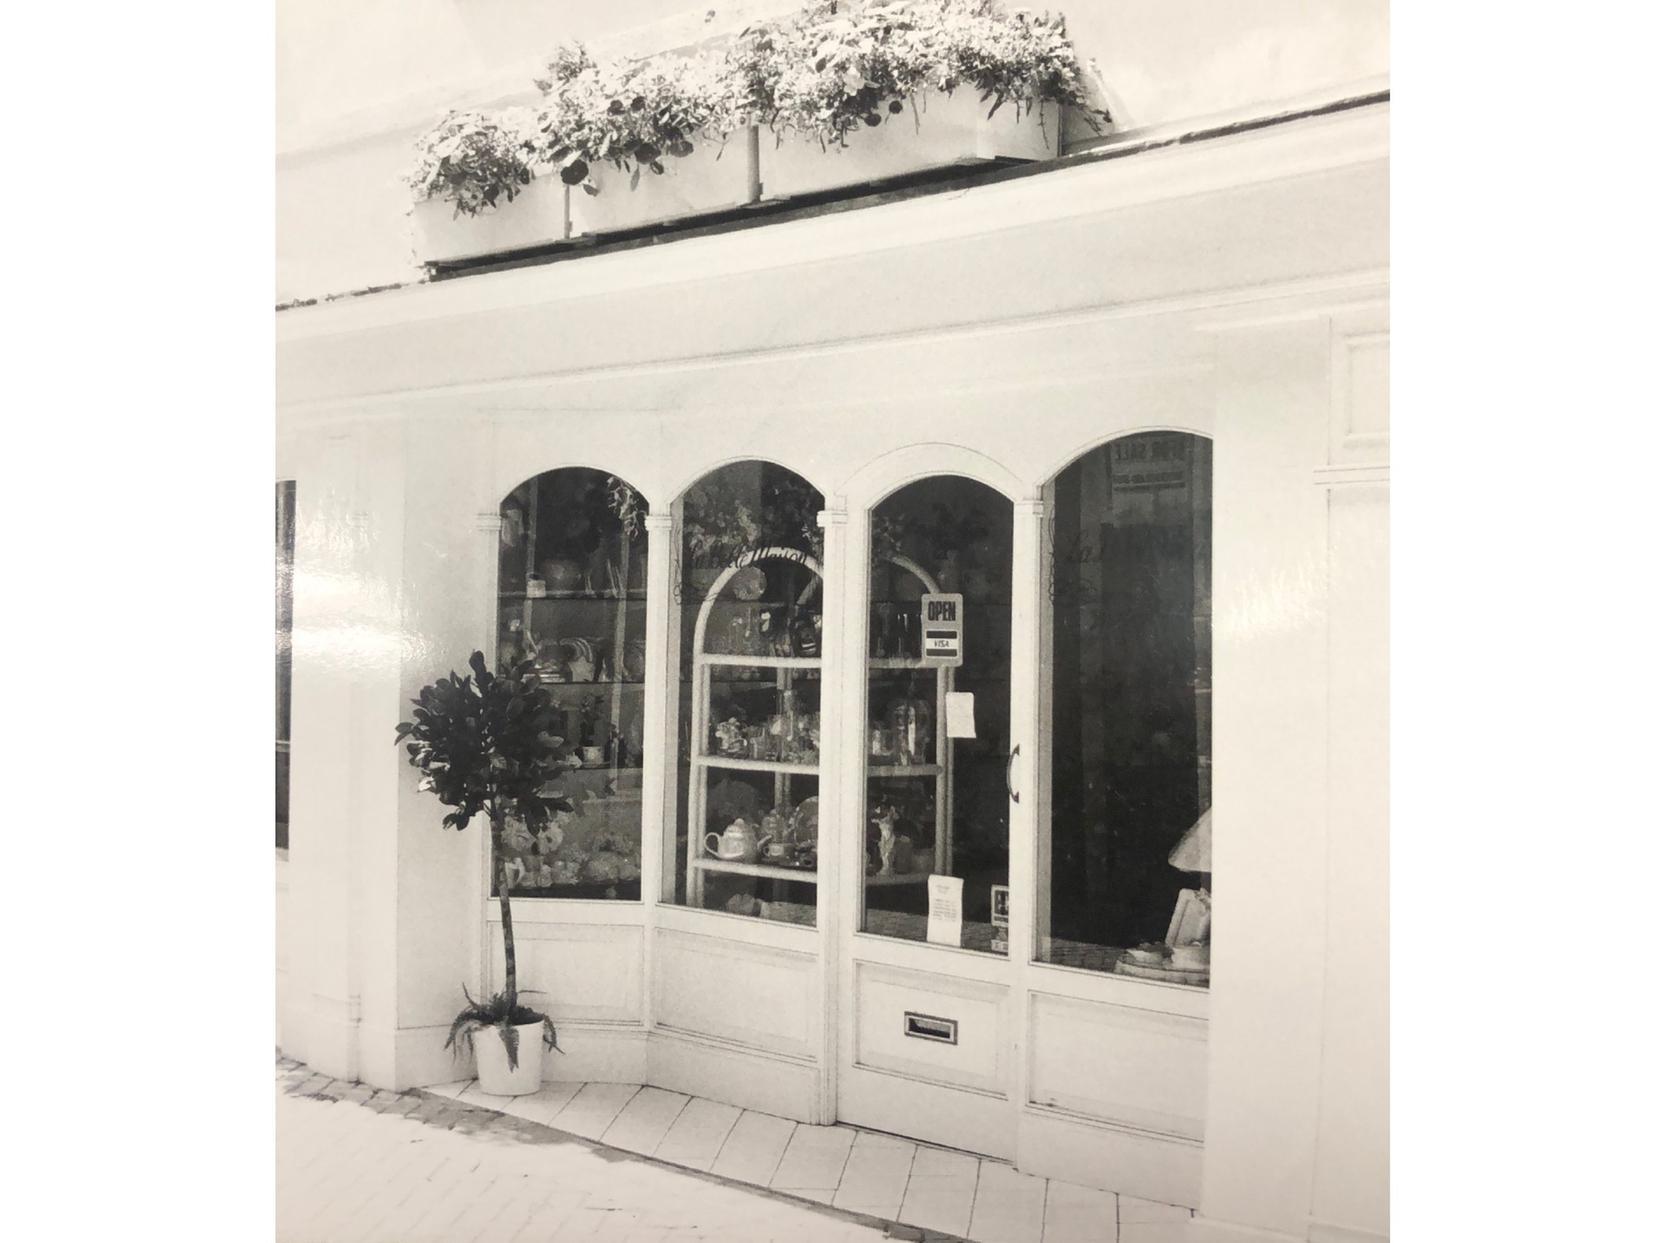 La Belle Maison in 1986, with windows full of ornaments in what looks to be Boddy's cafe today - can you remember this shop?